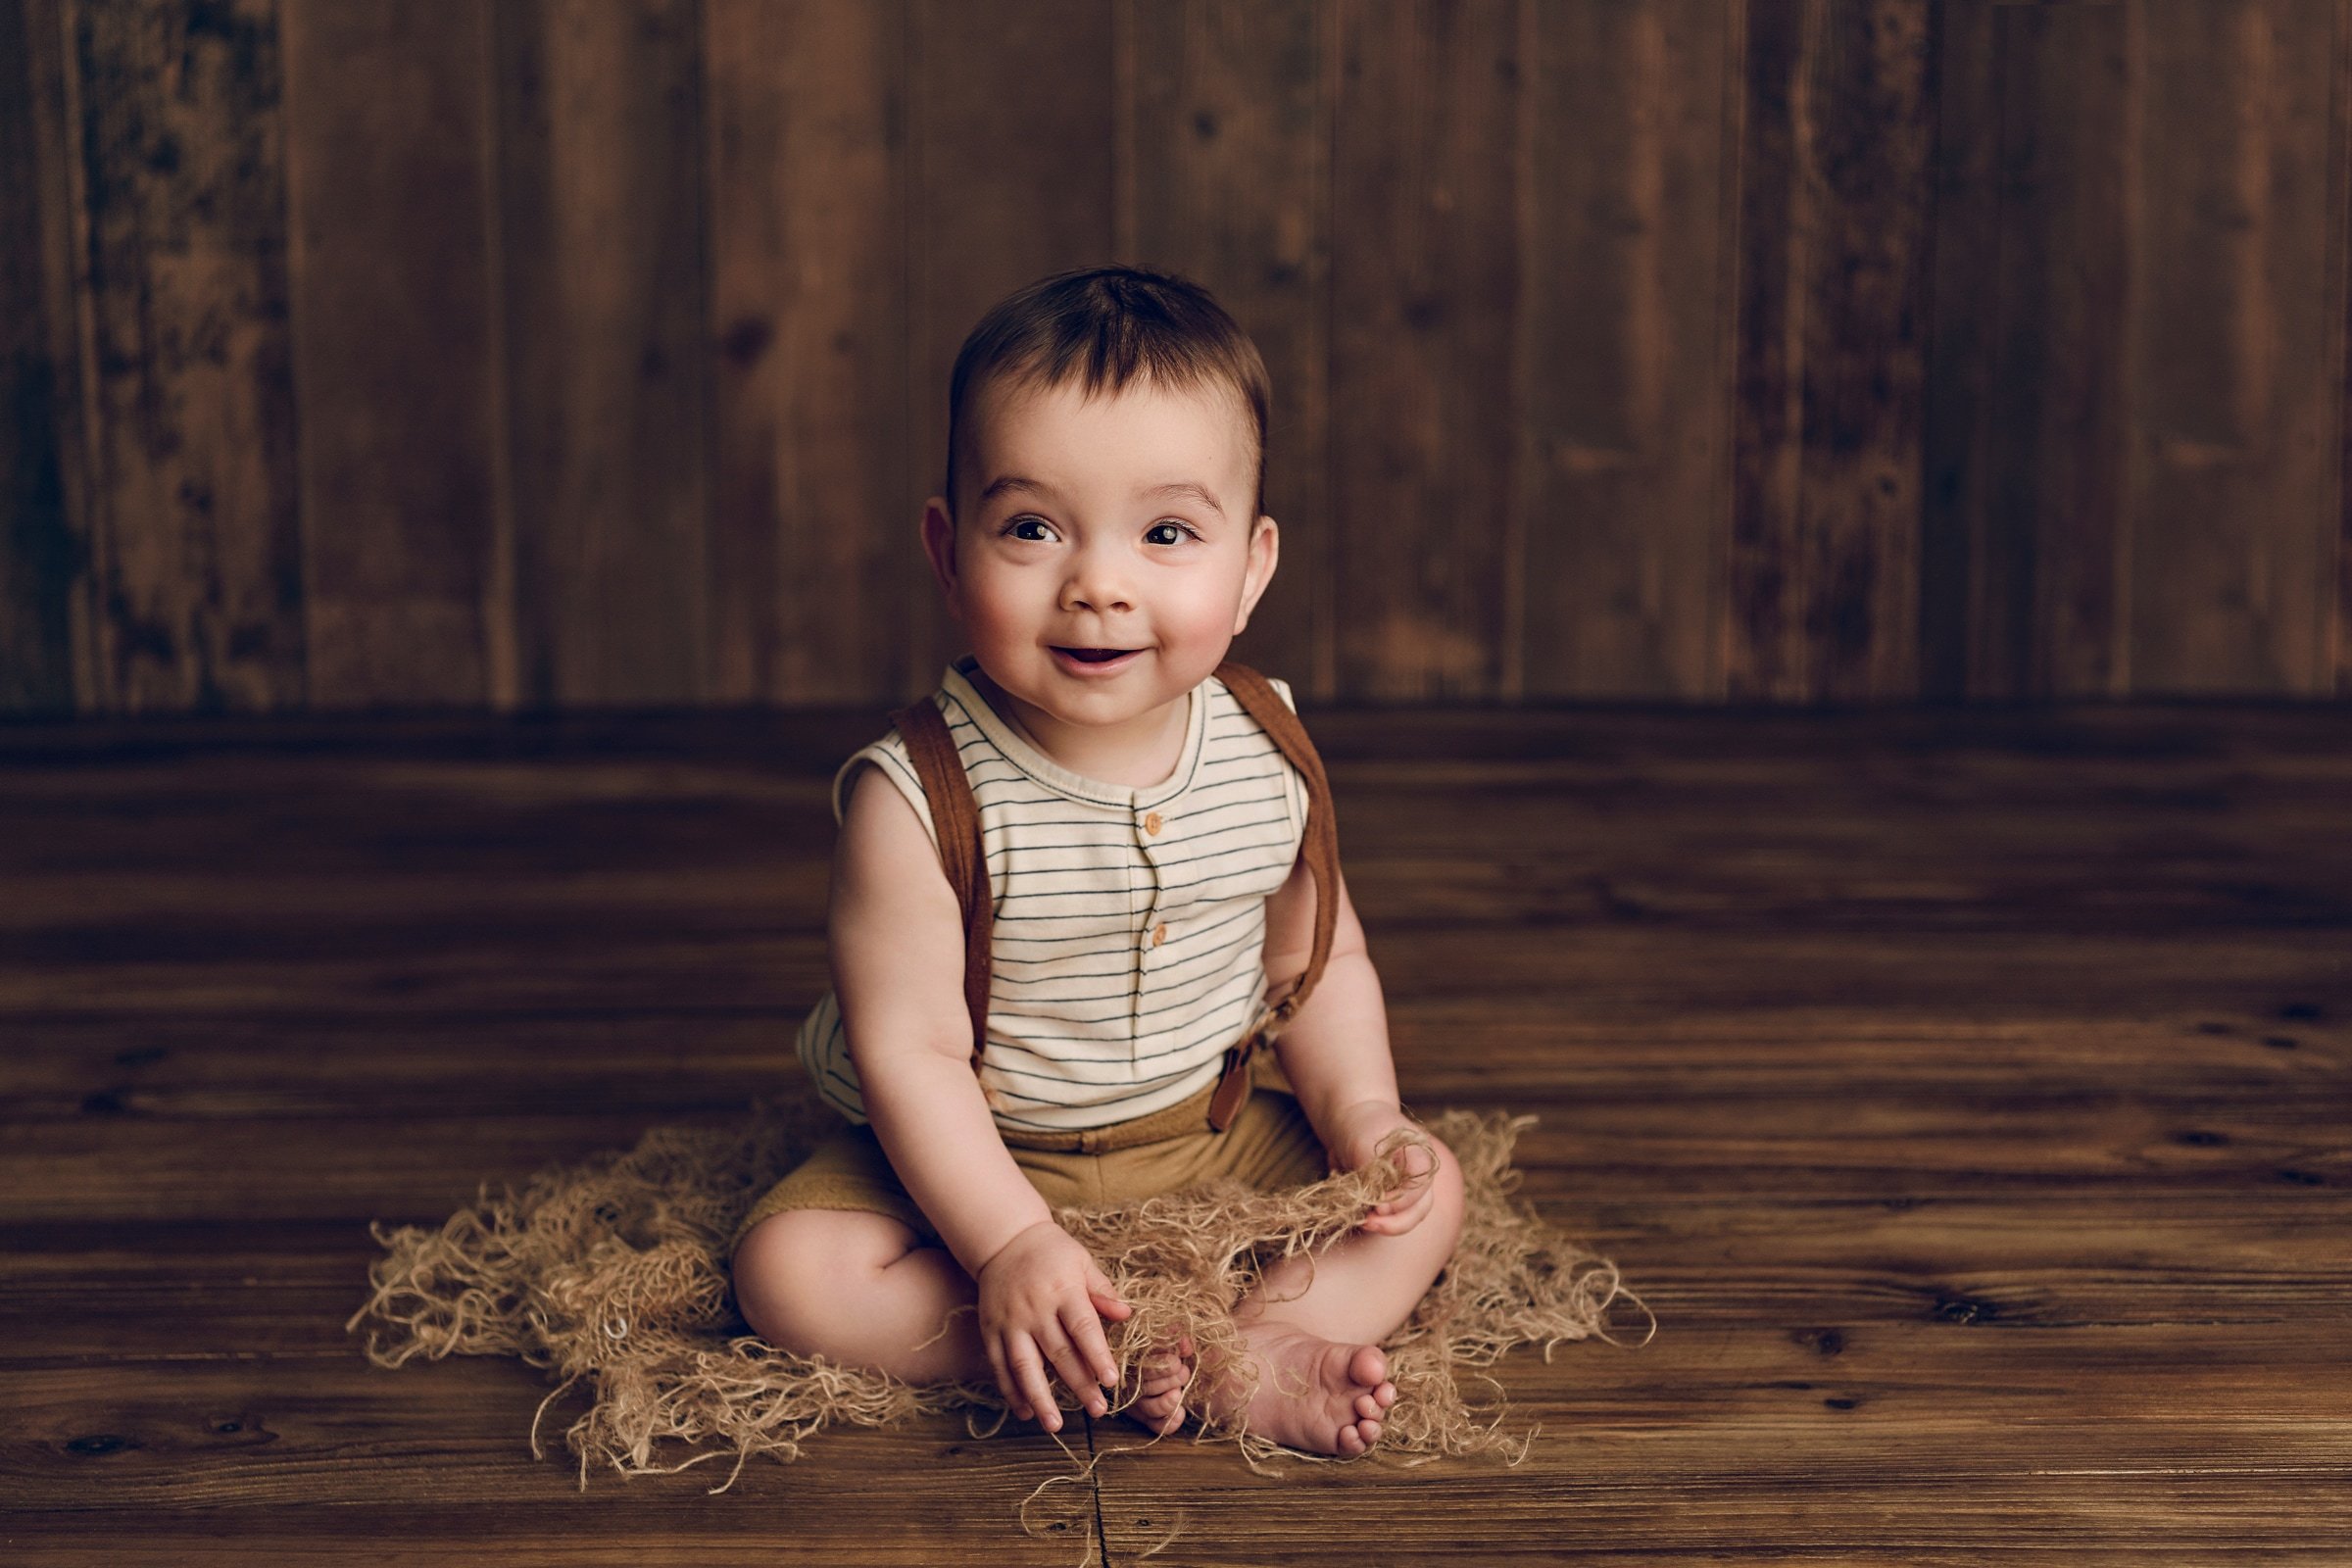 Melbourne Baby Photographer | Emma Pender Photography